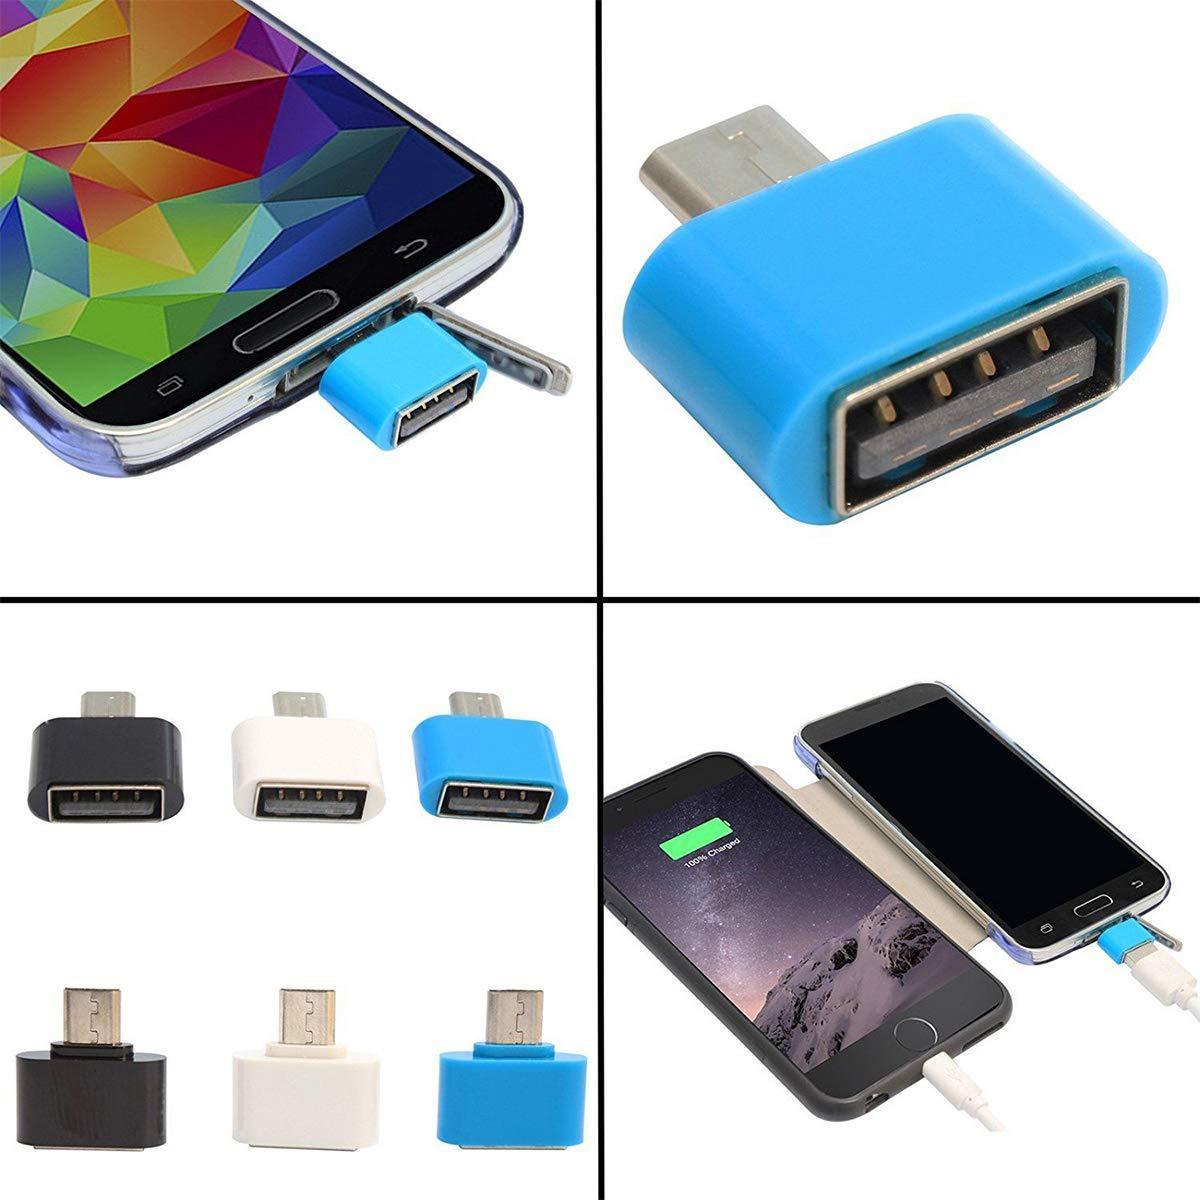 0260 Micro USB OTG to USB 2.0 (Android supported) - SkyShopy